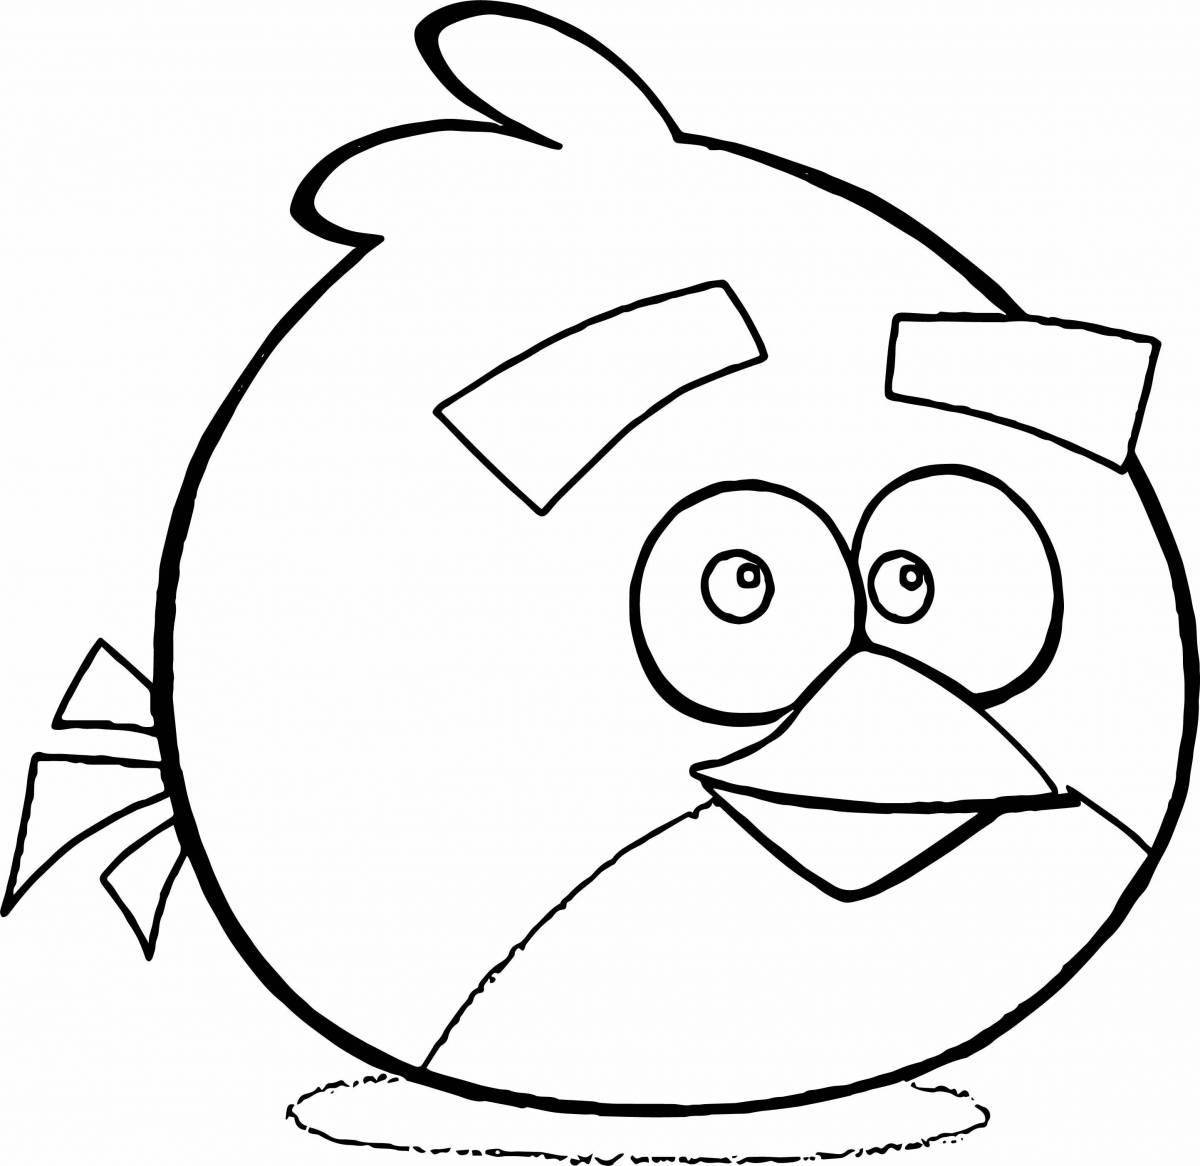 Angry birds for kids #1